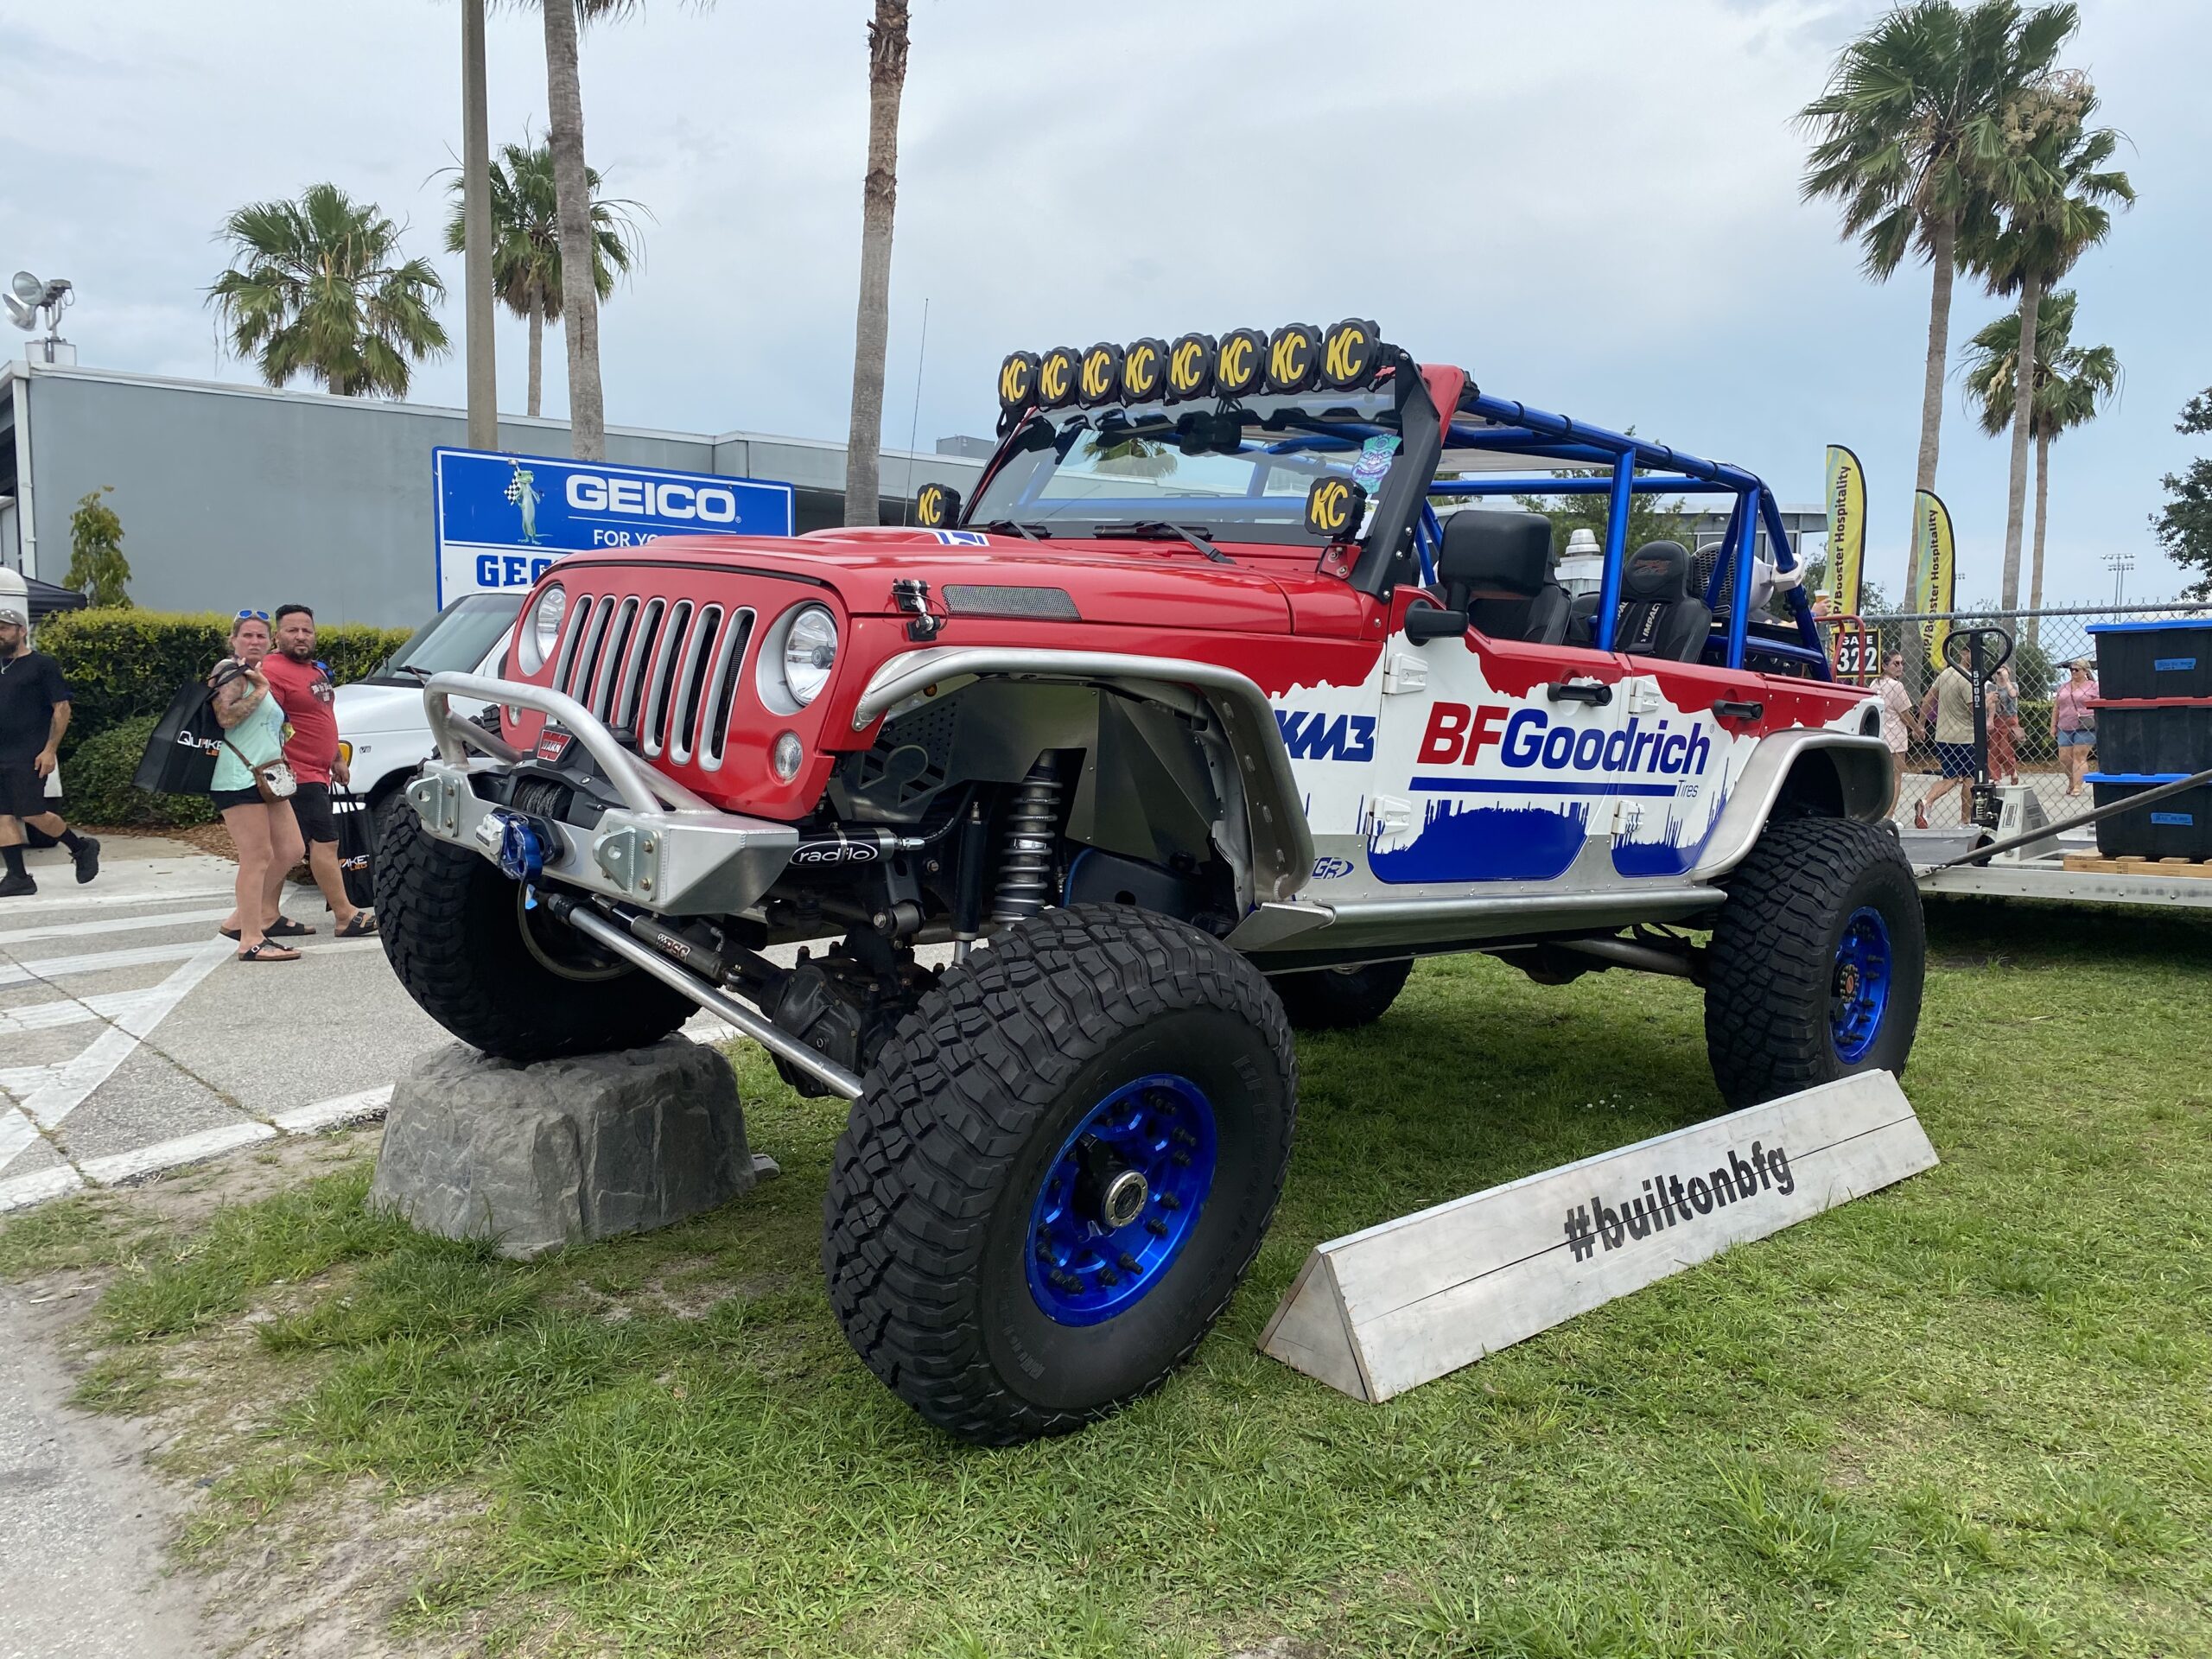 Red, white, and blue Jeep with BFGoodrich emblem on driver door parked on grass.